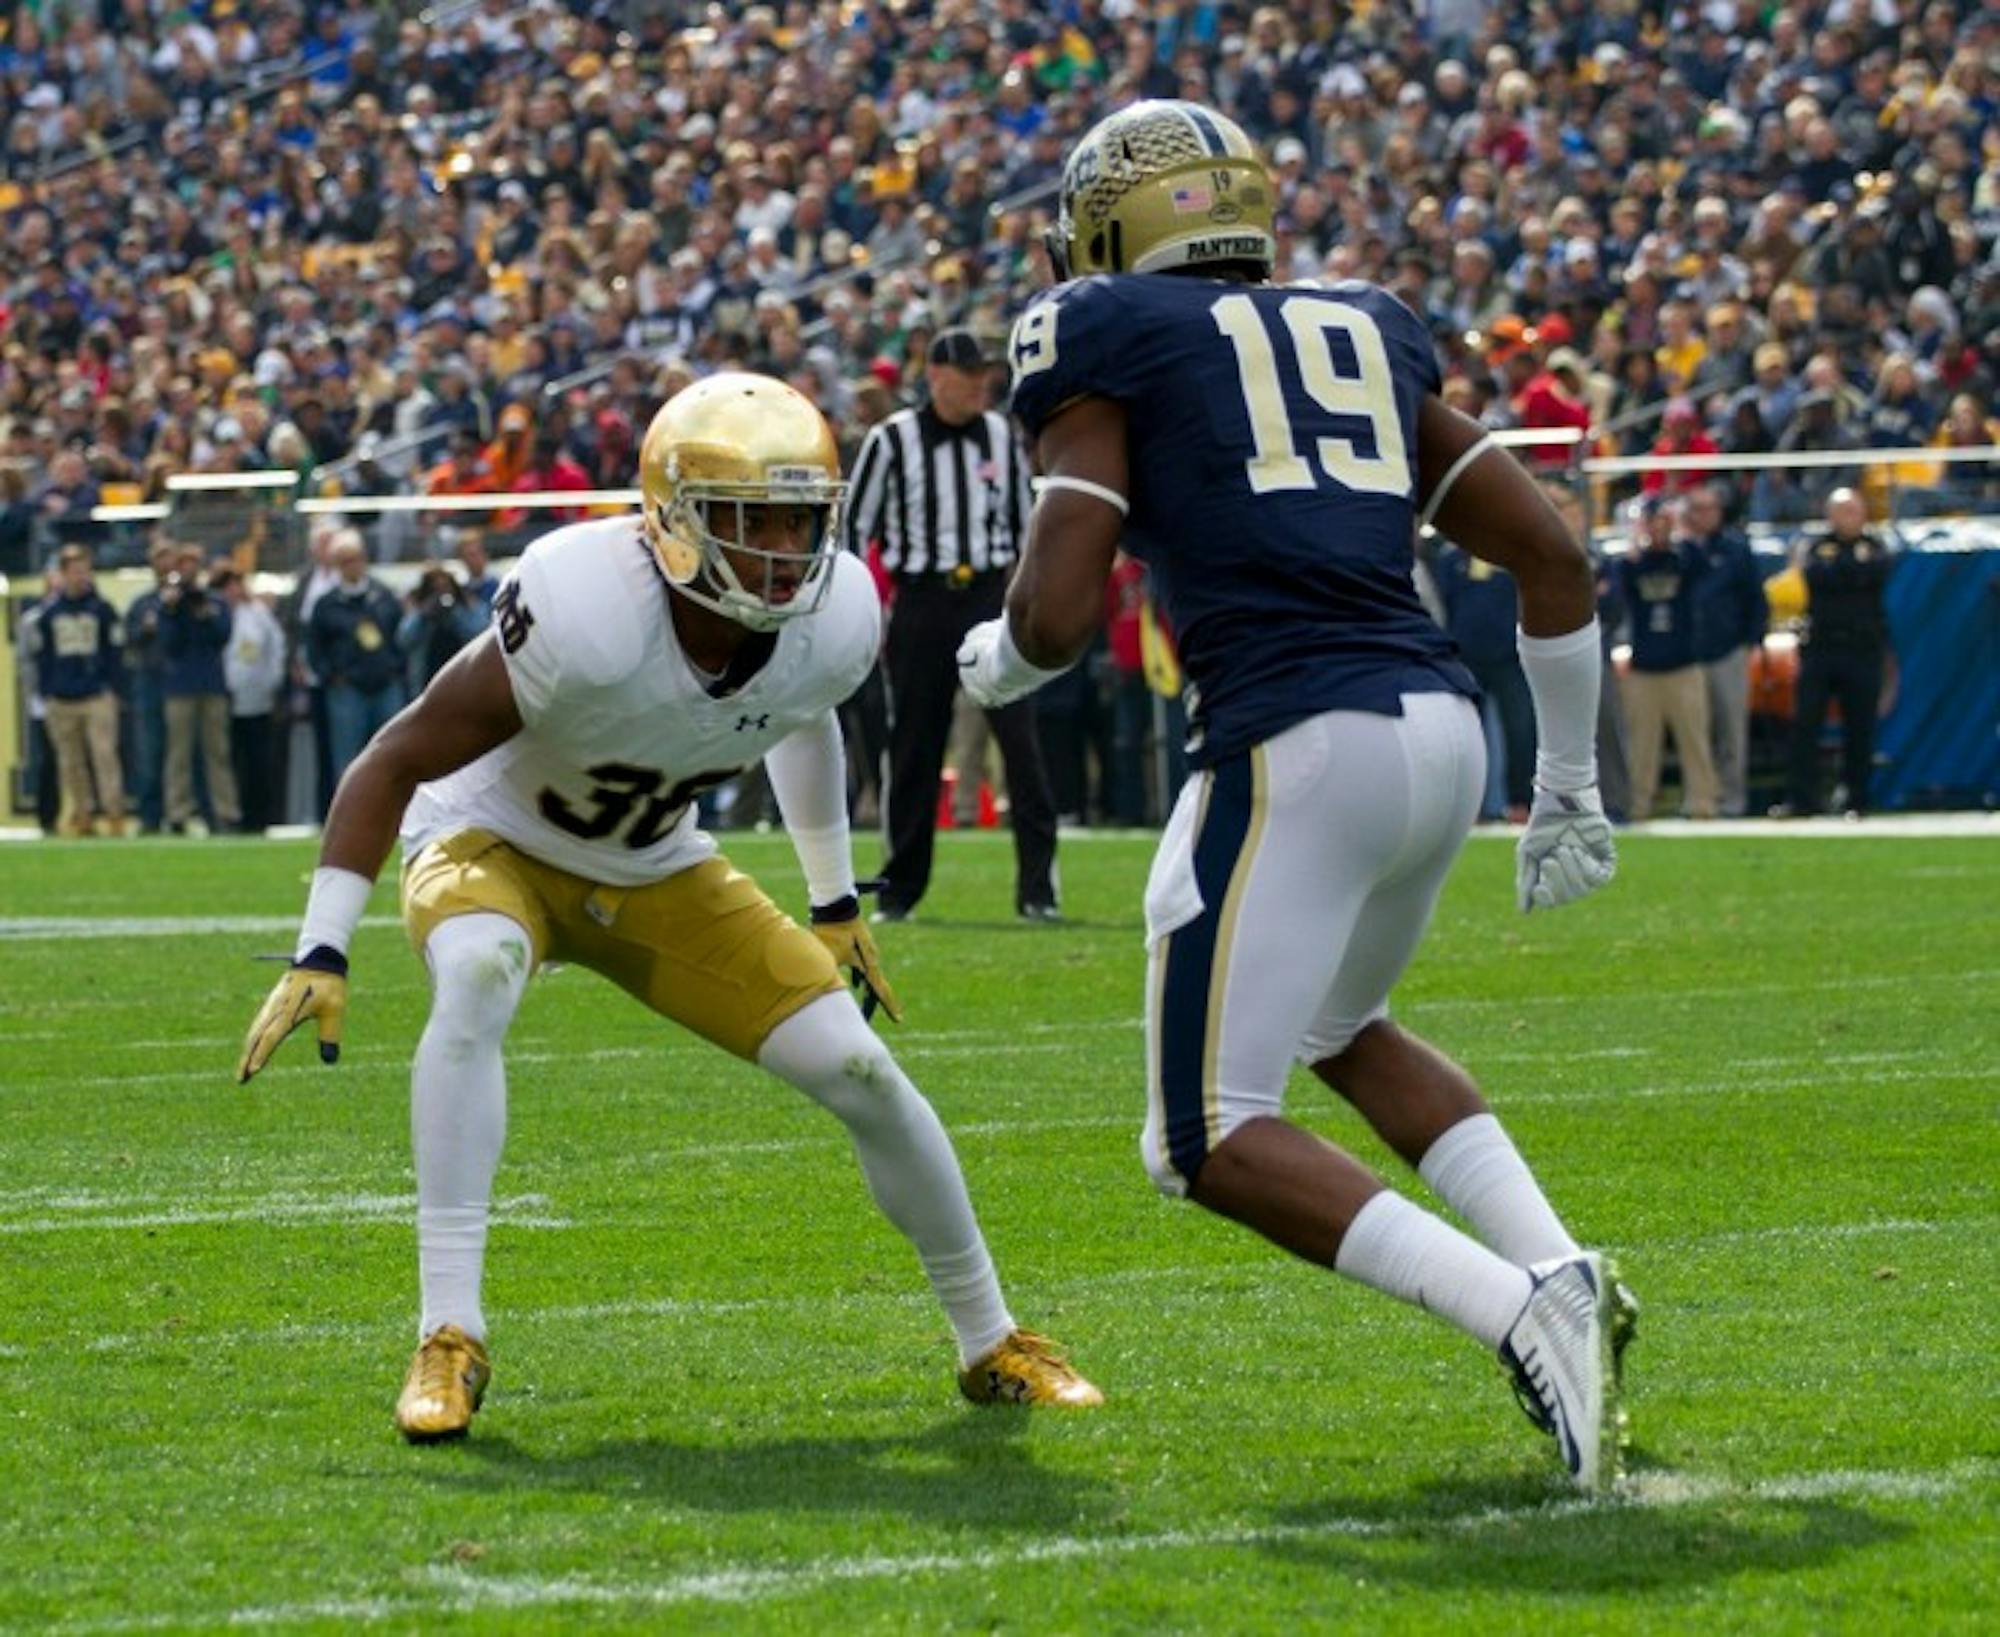 Irish senior cornerback Cole Luke defends a receiver during Notre Dame’s 42-30 win over Pittsburgh at Heinz Field on Nov. 5. Luke enters the 2016 season as one of Notre Dame’s most experienced defenders, with six career interceptions in 30 games played.